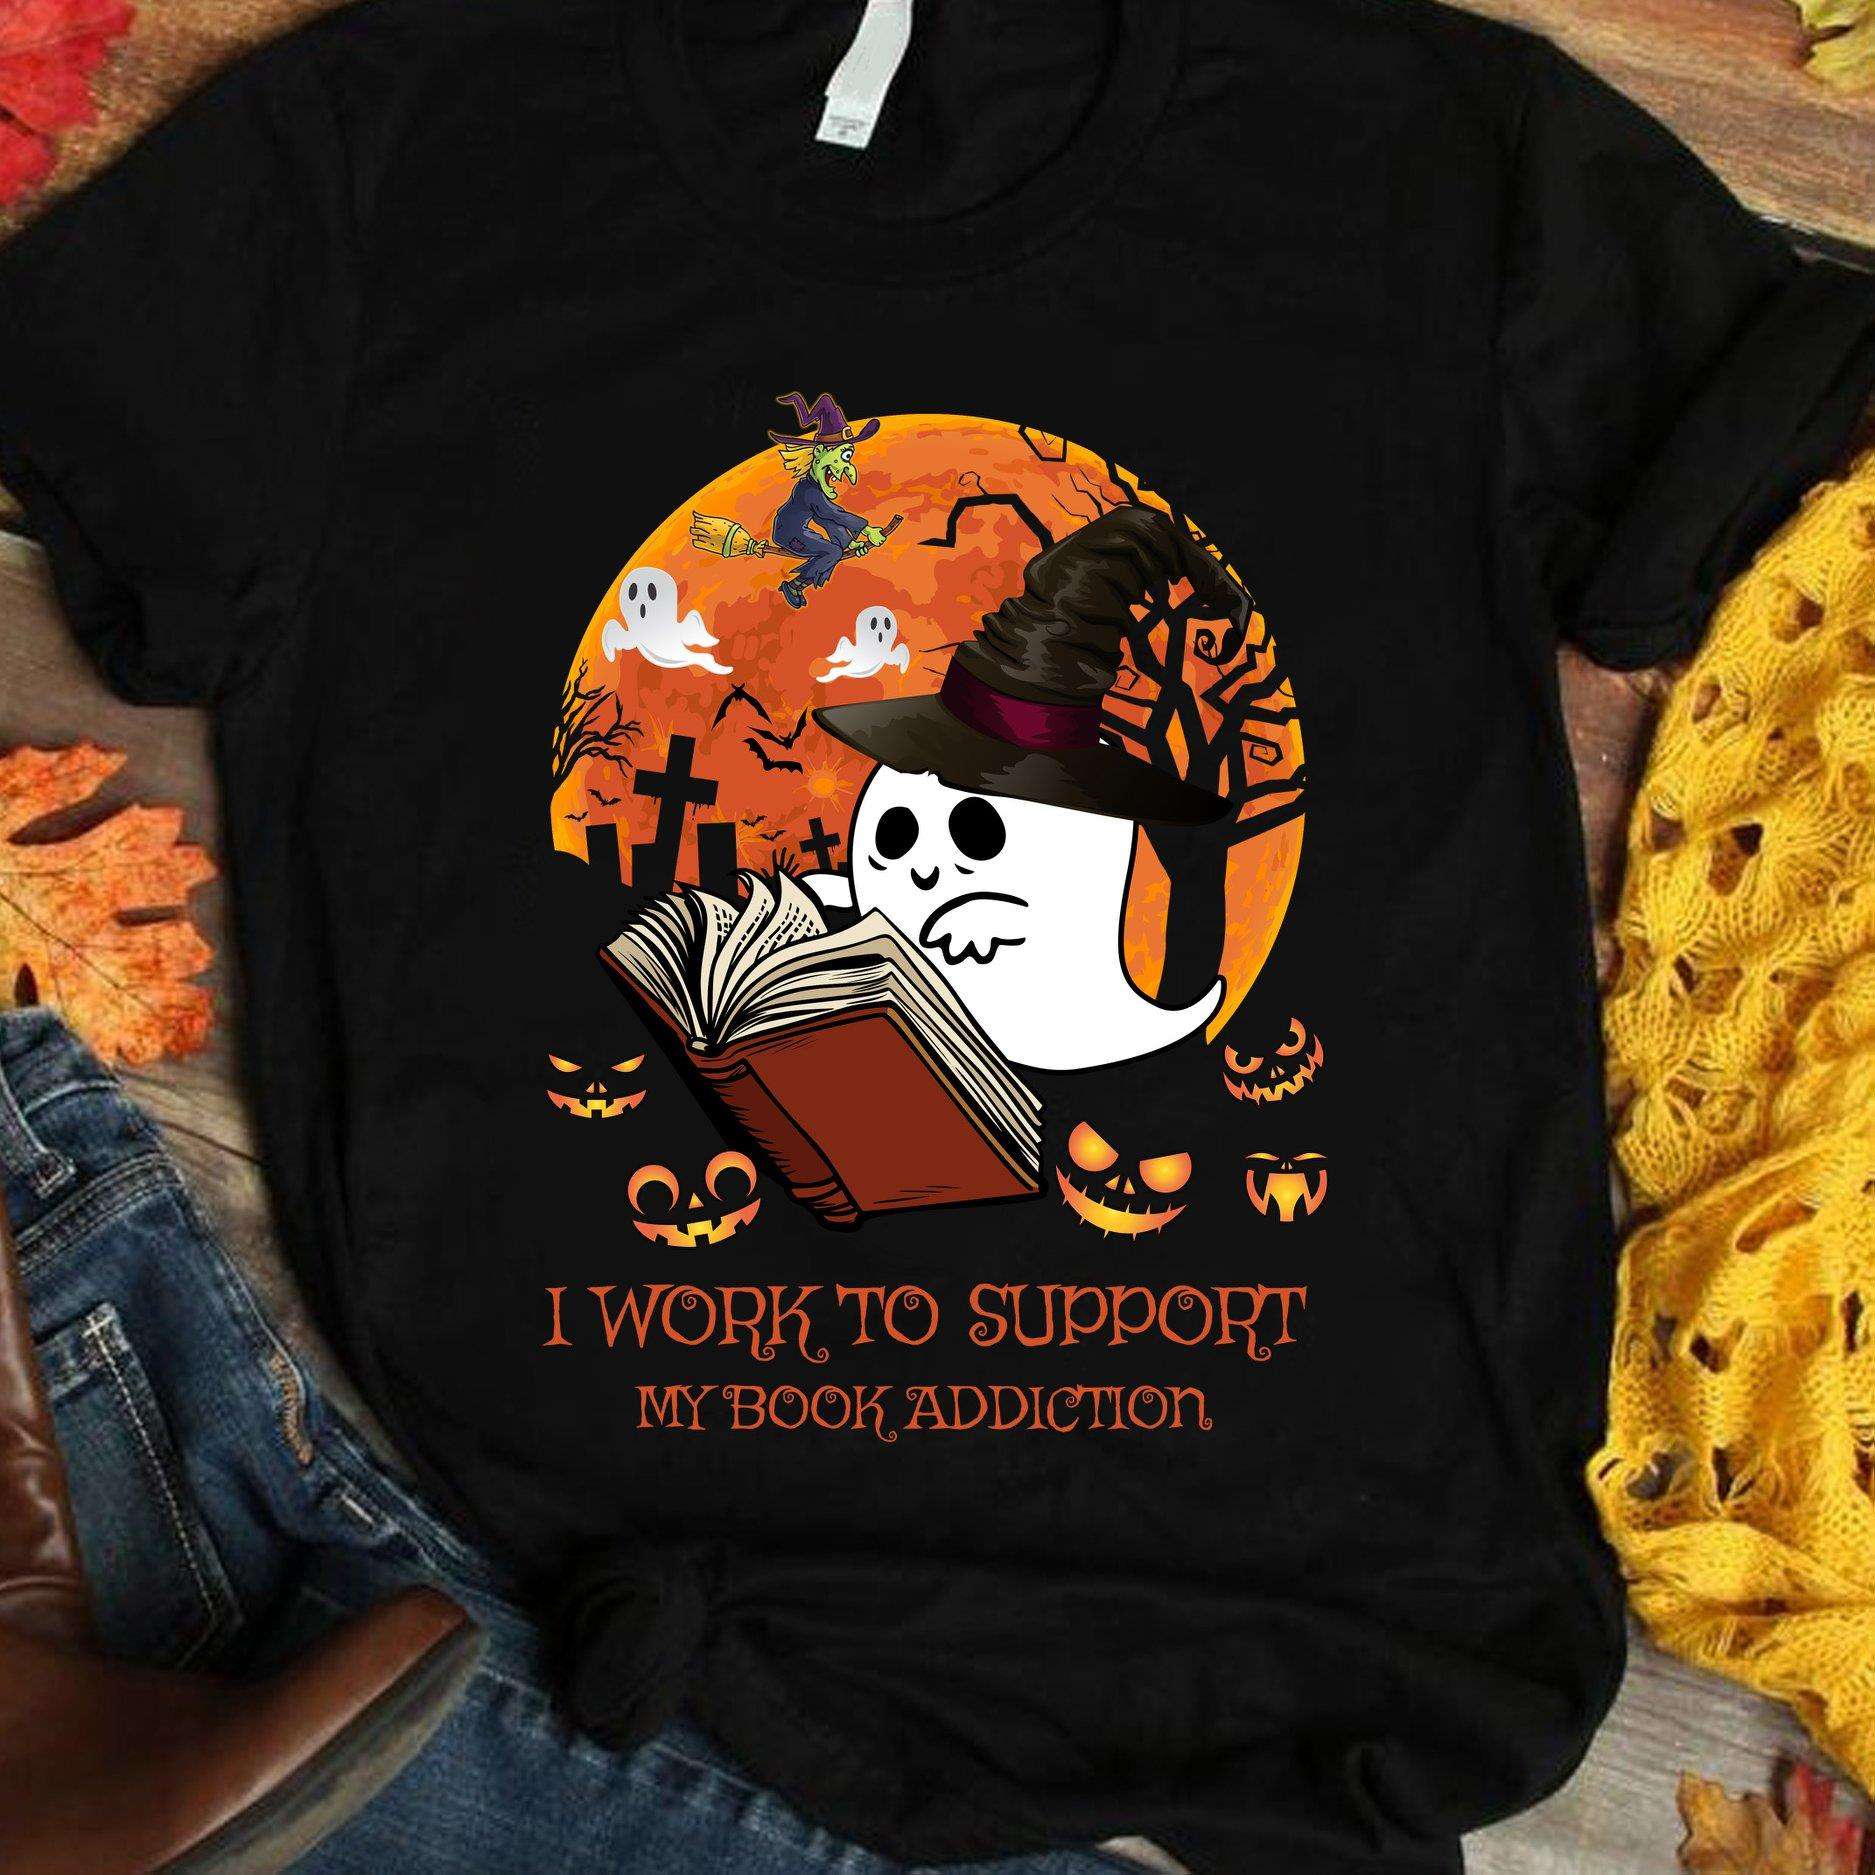 I work to support my book addiction - White boo reading book, Halloween gift for bookaholic